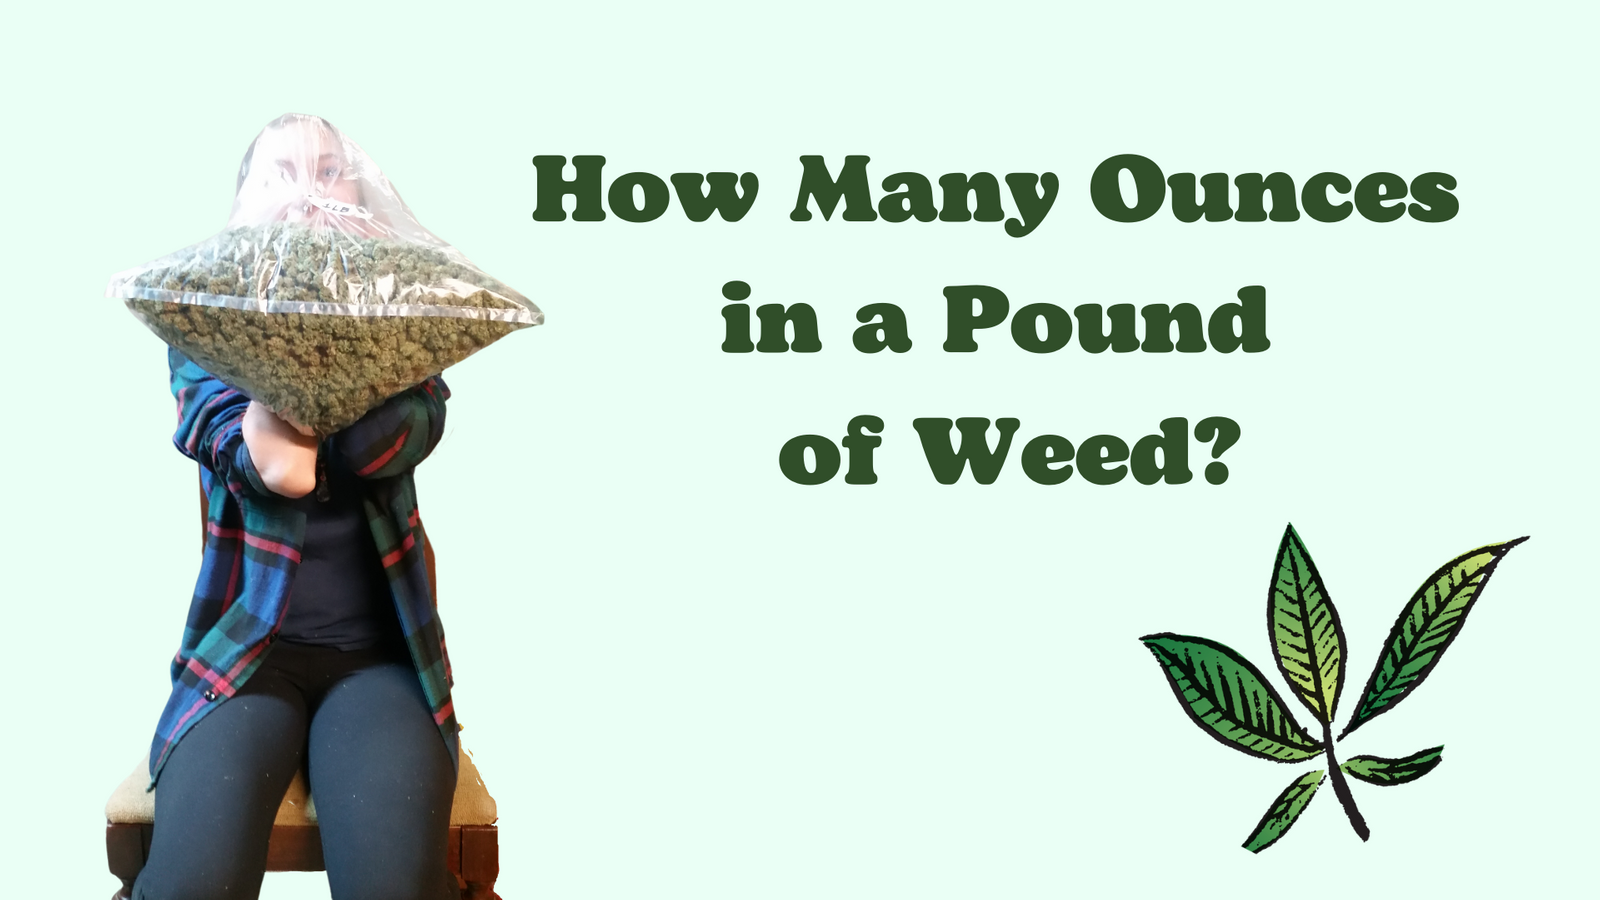 https://apotforpot.com/assets/ext/s/files/1/2426/5205/articles/opt/How_Many_Ounces_in_a_Pound_of_Weed_1.png